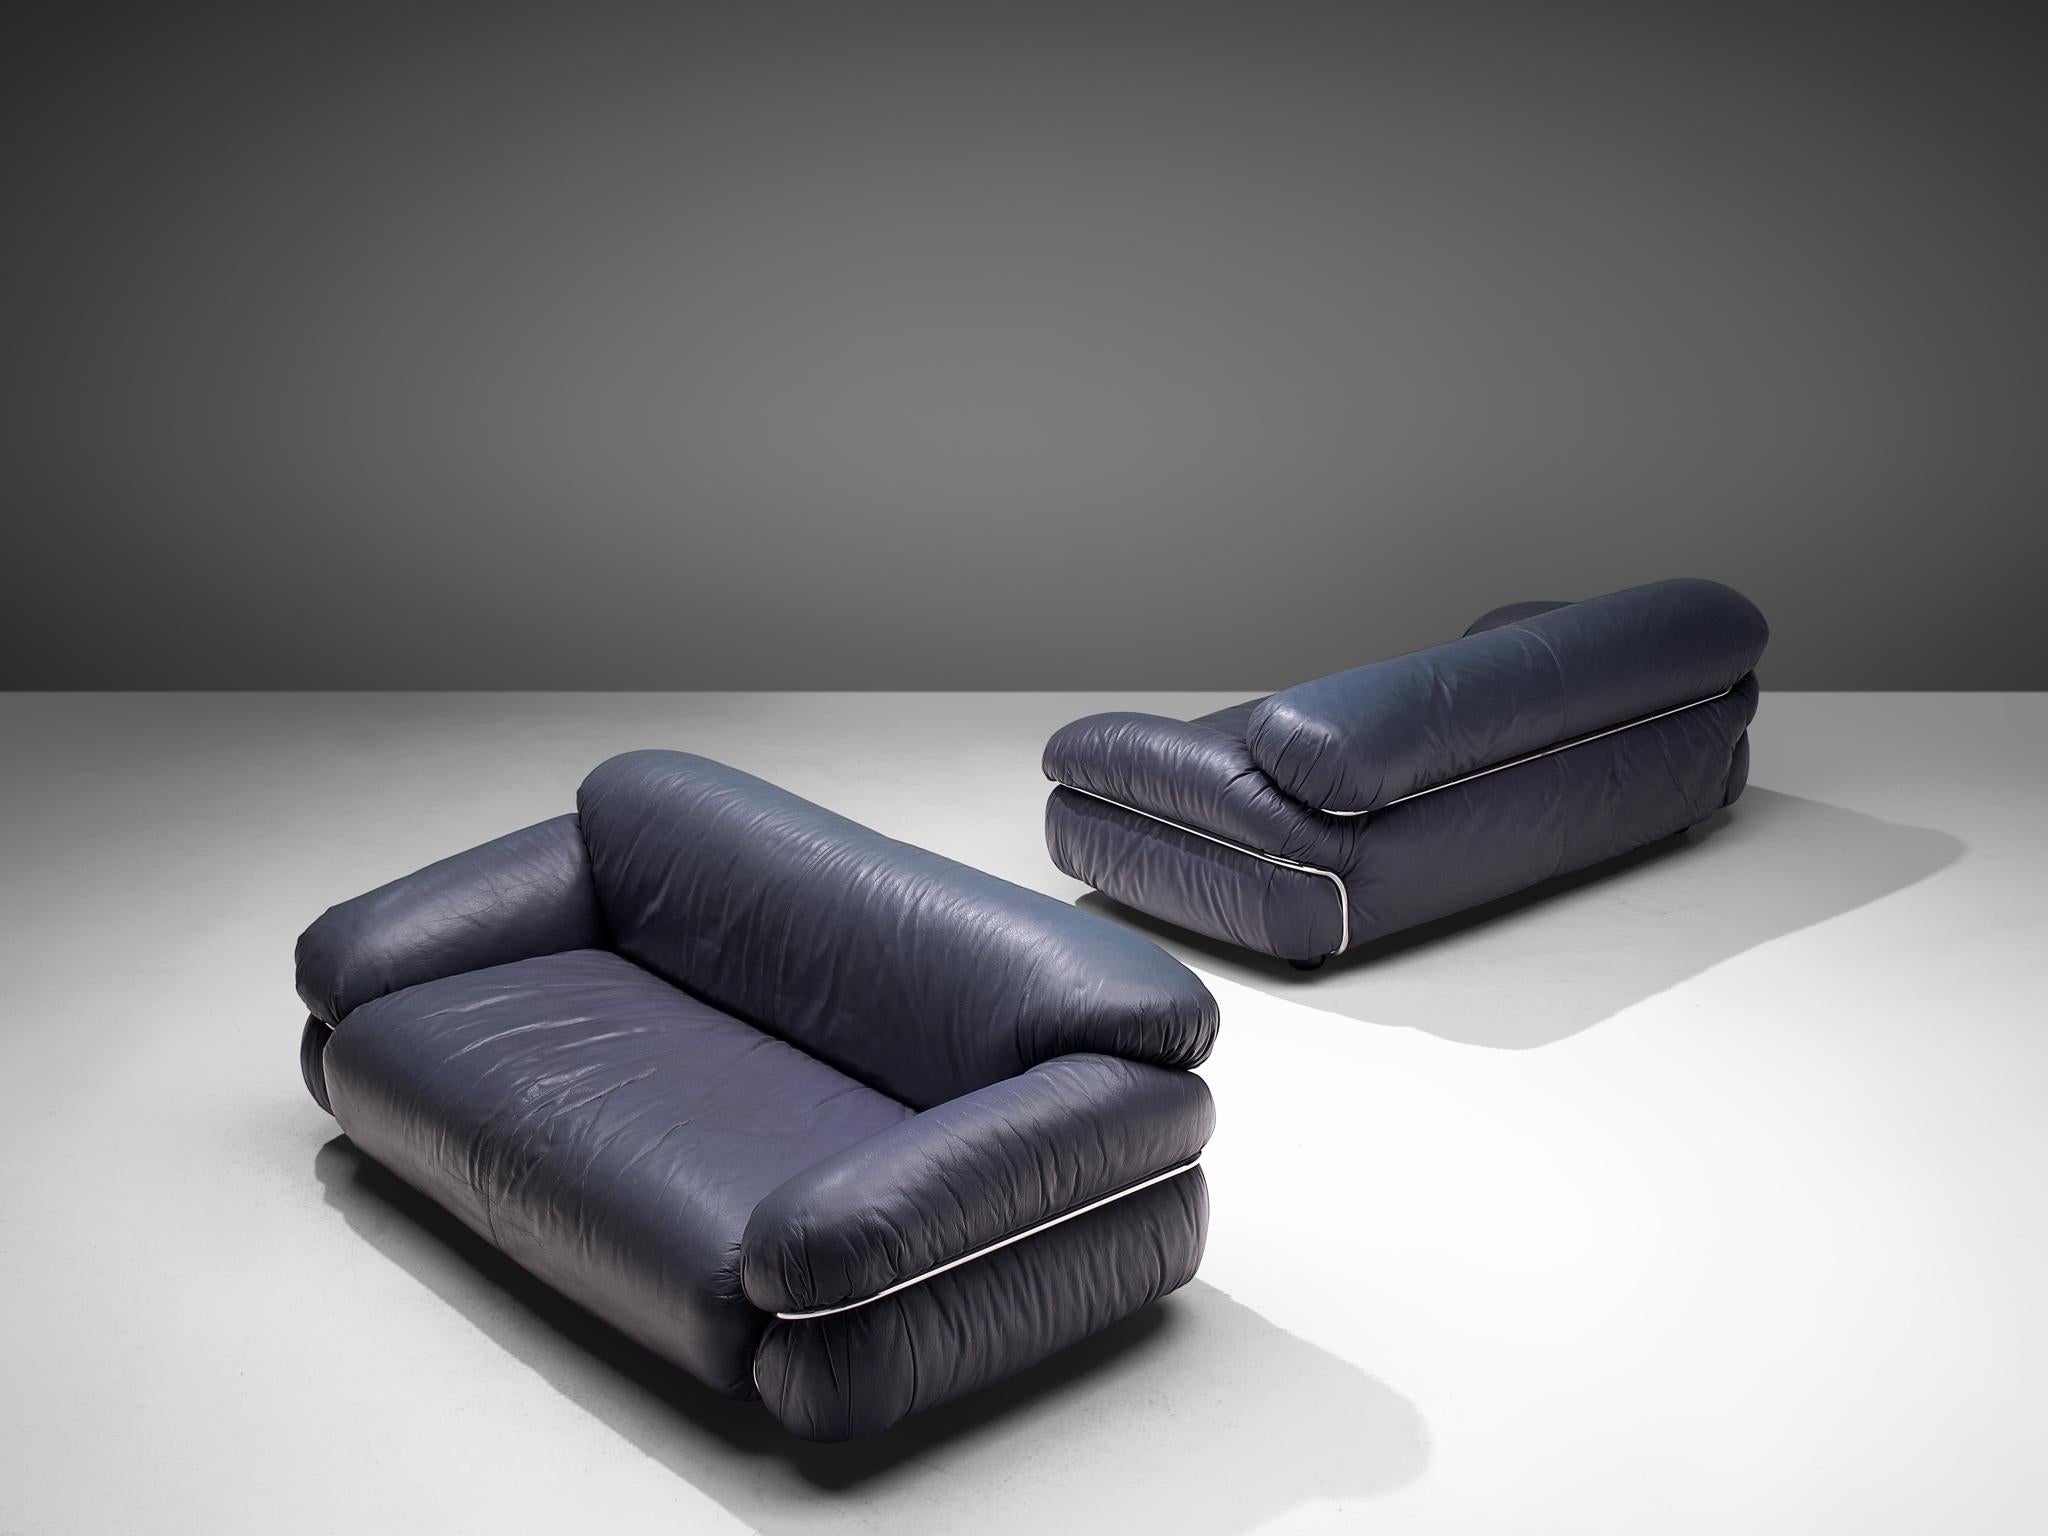 Gianfranco Frattini for Cassina, two sofas 'Sesann', dark blue leatherette and chrome-plated steel, Italy, 1969

These postmodern two-seat sofas are designed by Gianfranco Frattini, the 'Sesann' works from the idea of informal sitting where